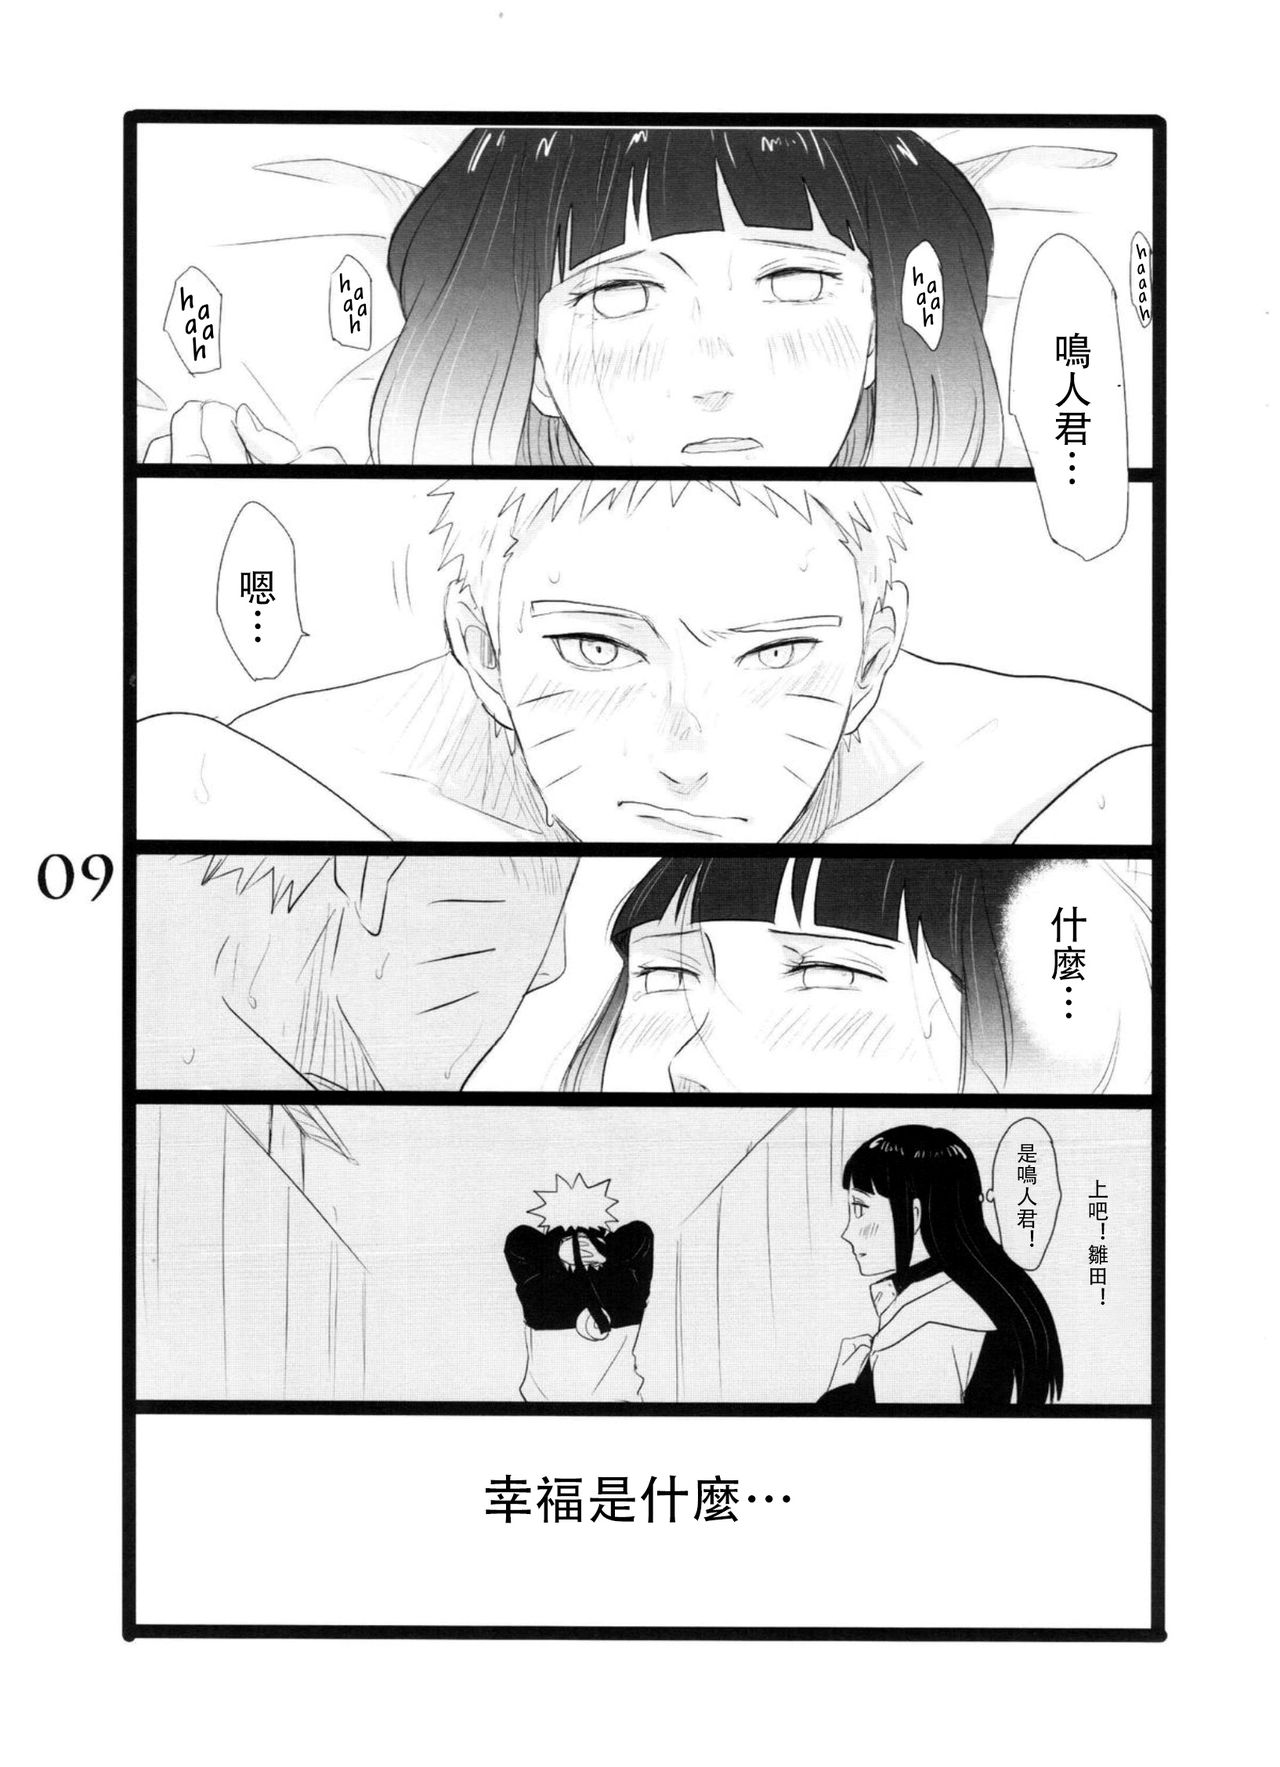 (C88) [blink (shimoyake)] YOUR MY SWEET - I LOVE YOU DARLING (Naruto) [Chinese] [沒有漢化] page 10 full